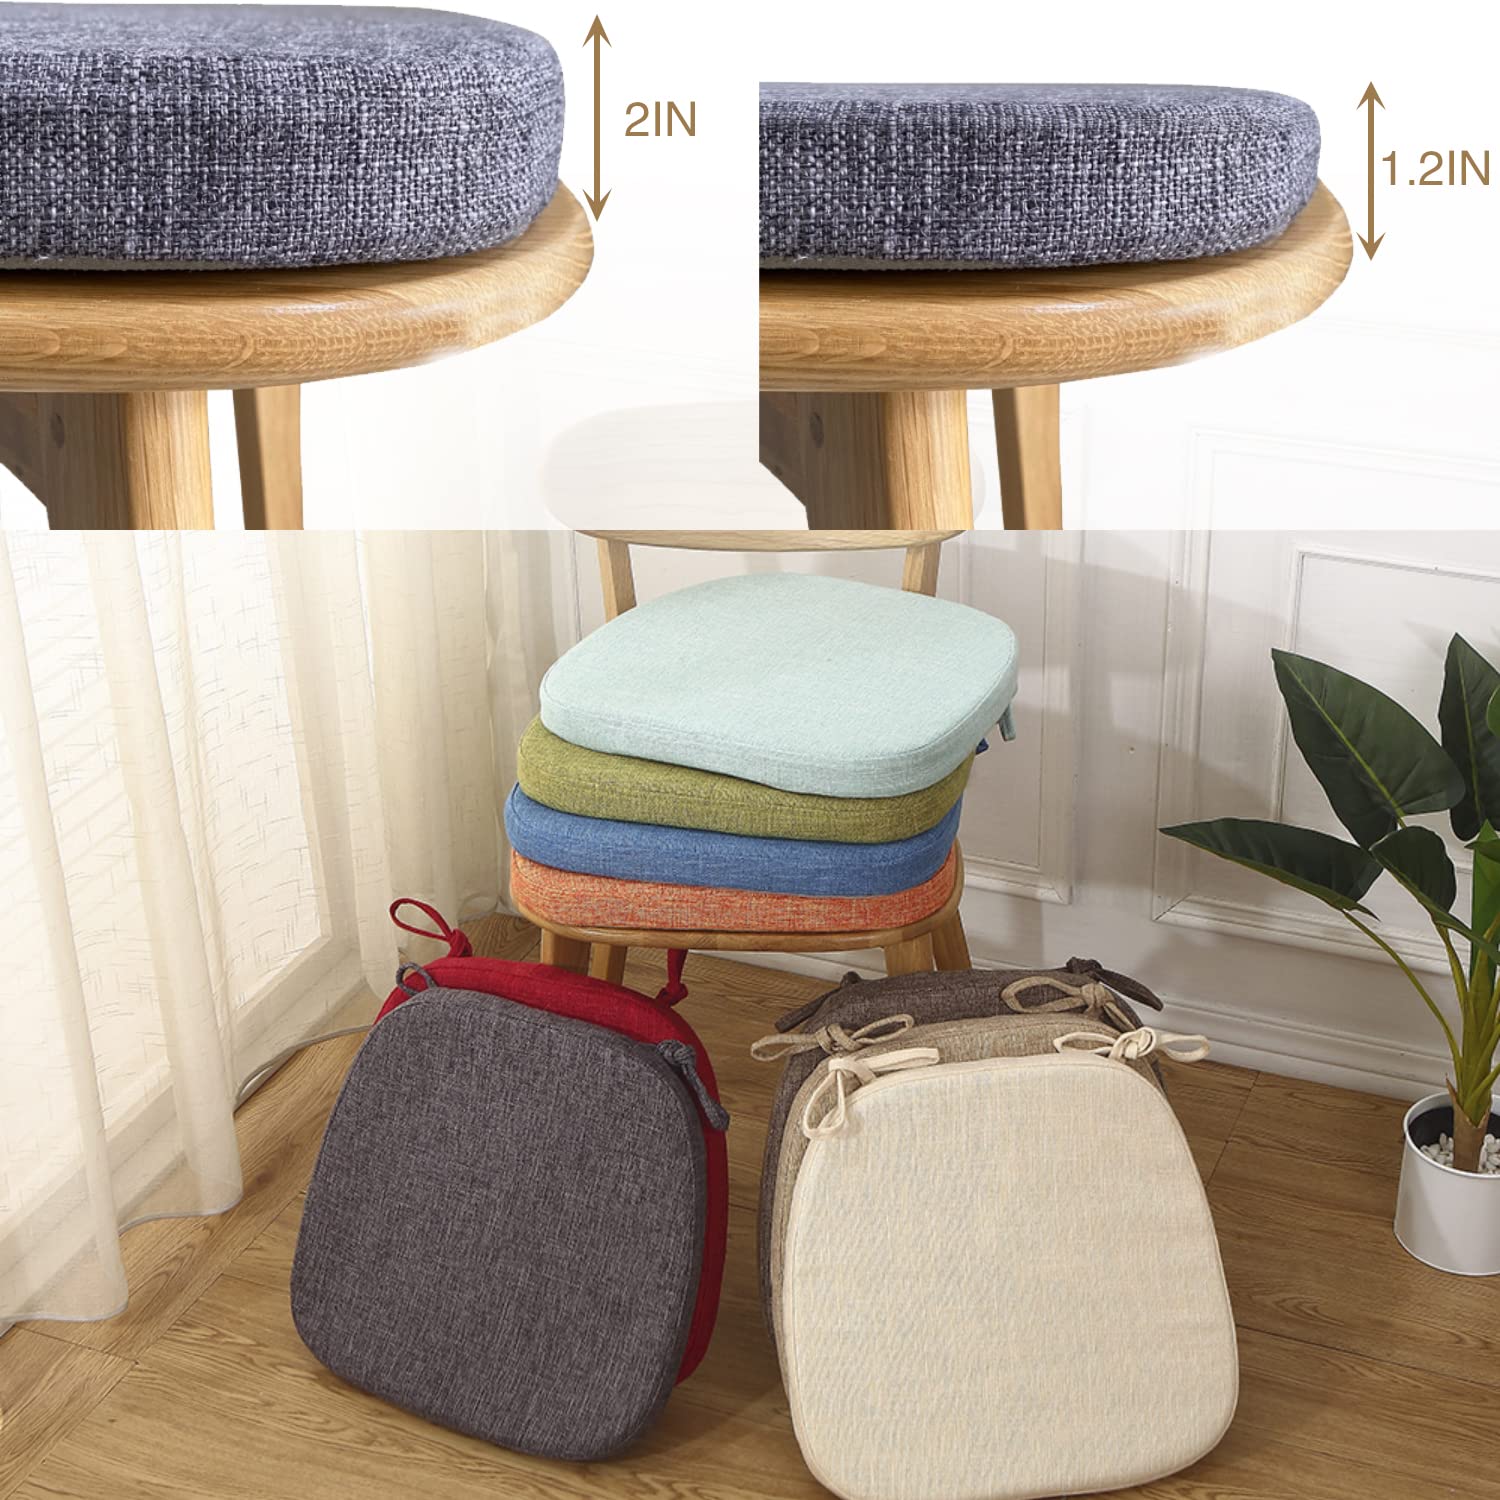 Kimgull Chair Cushions with Ties, Non Slip Chair Pads Set of 4, Thickened Breathable Cover Detachable Seat Cushion, for Kitchen Dining Living Room Office Chair (15.7x15x1.2In Grey)